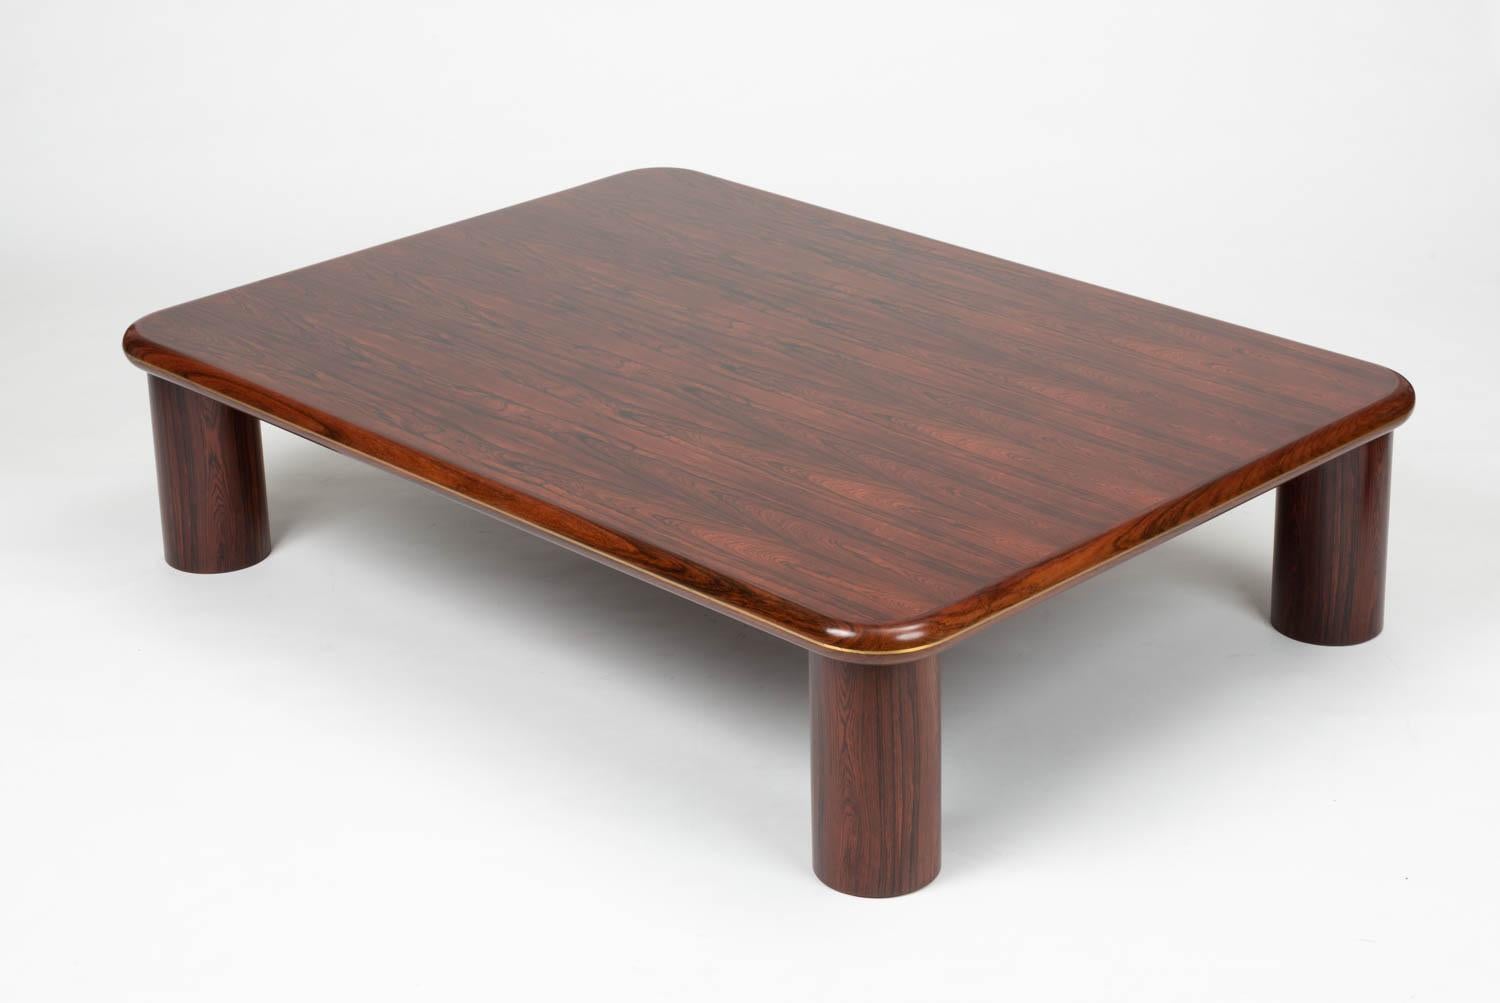 A large-scale coffee table in highly figurative rosewood veneer over hardwood. The solid rosewood banding is accented by a thin brass detail. The thick rectangular top sits atop four round pillar legs, slightly inset from the corners.

Condition: